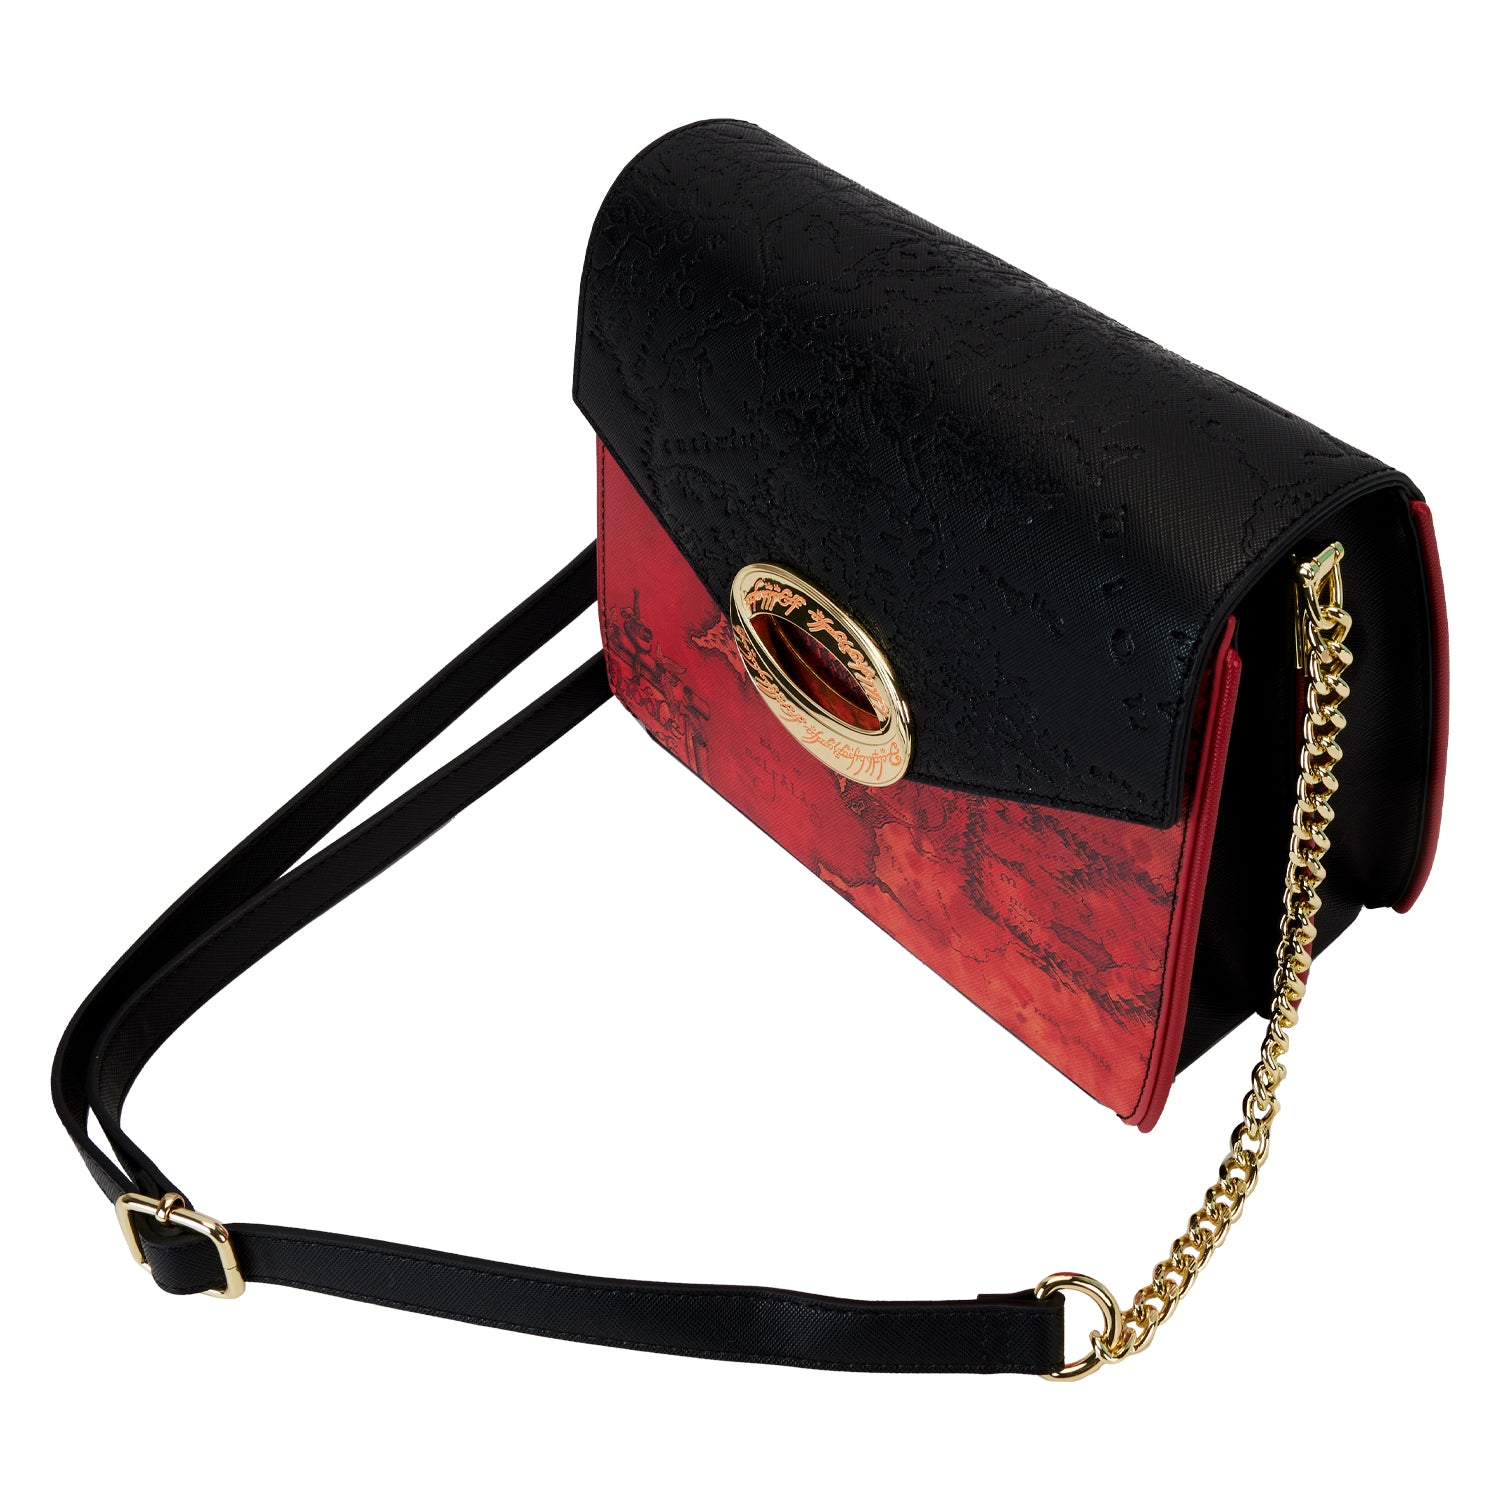 Loungefly x Lord of the Rings The One Ring Crossbody Bag